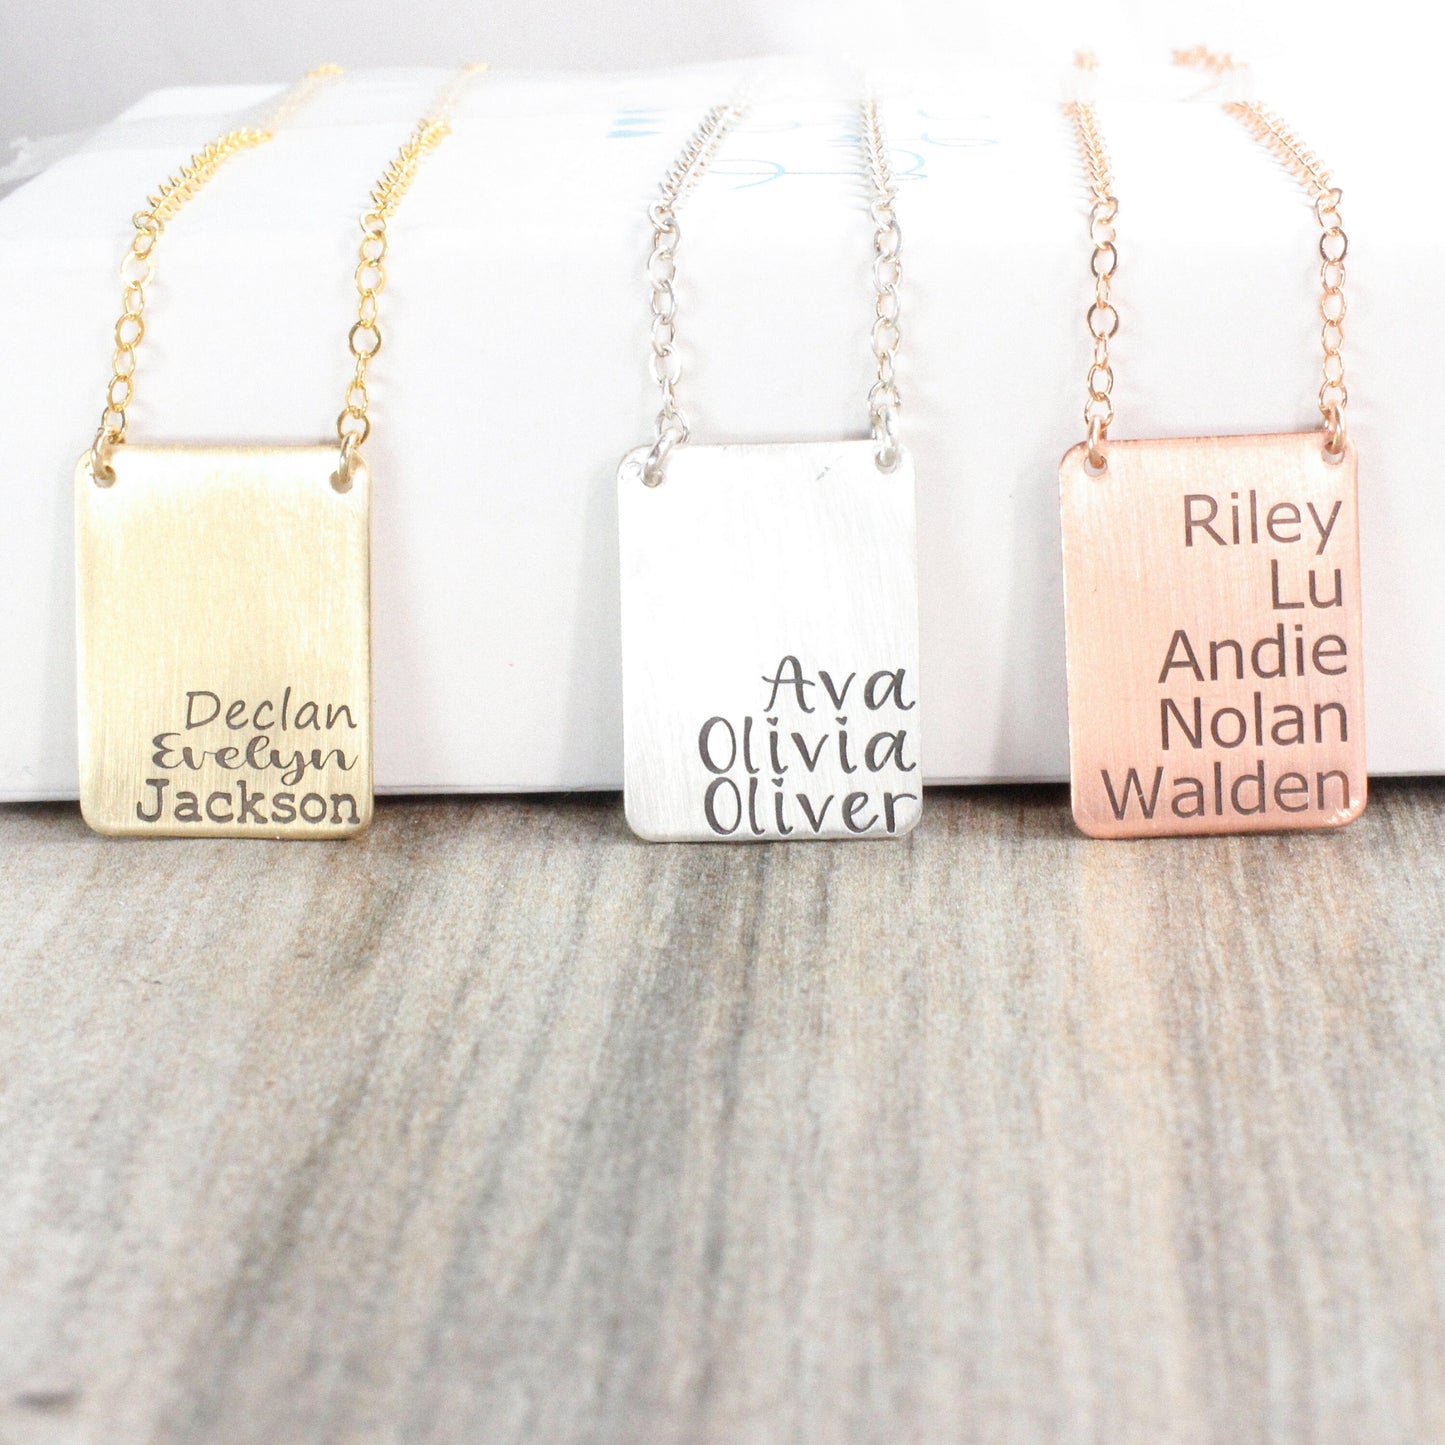 Custom Engraved Name Necklace Personalized Gift for Women // Mama Necklace Gift for Mom Handmade Jewelry Unique Jewelry Gift for Her